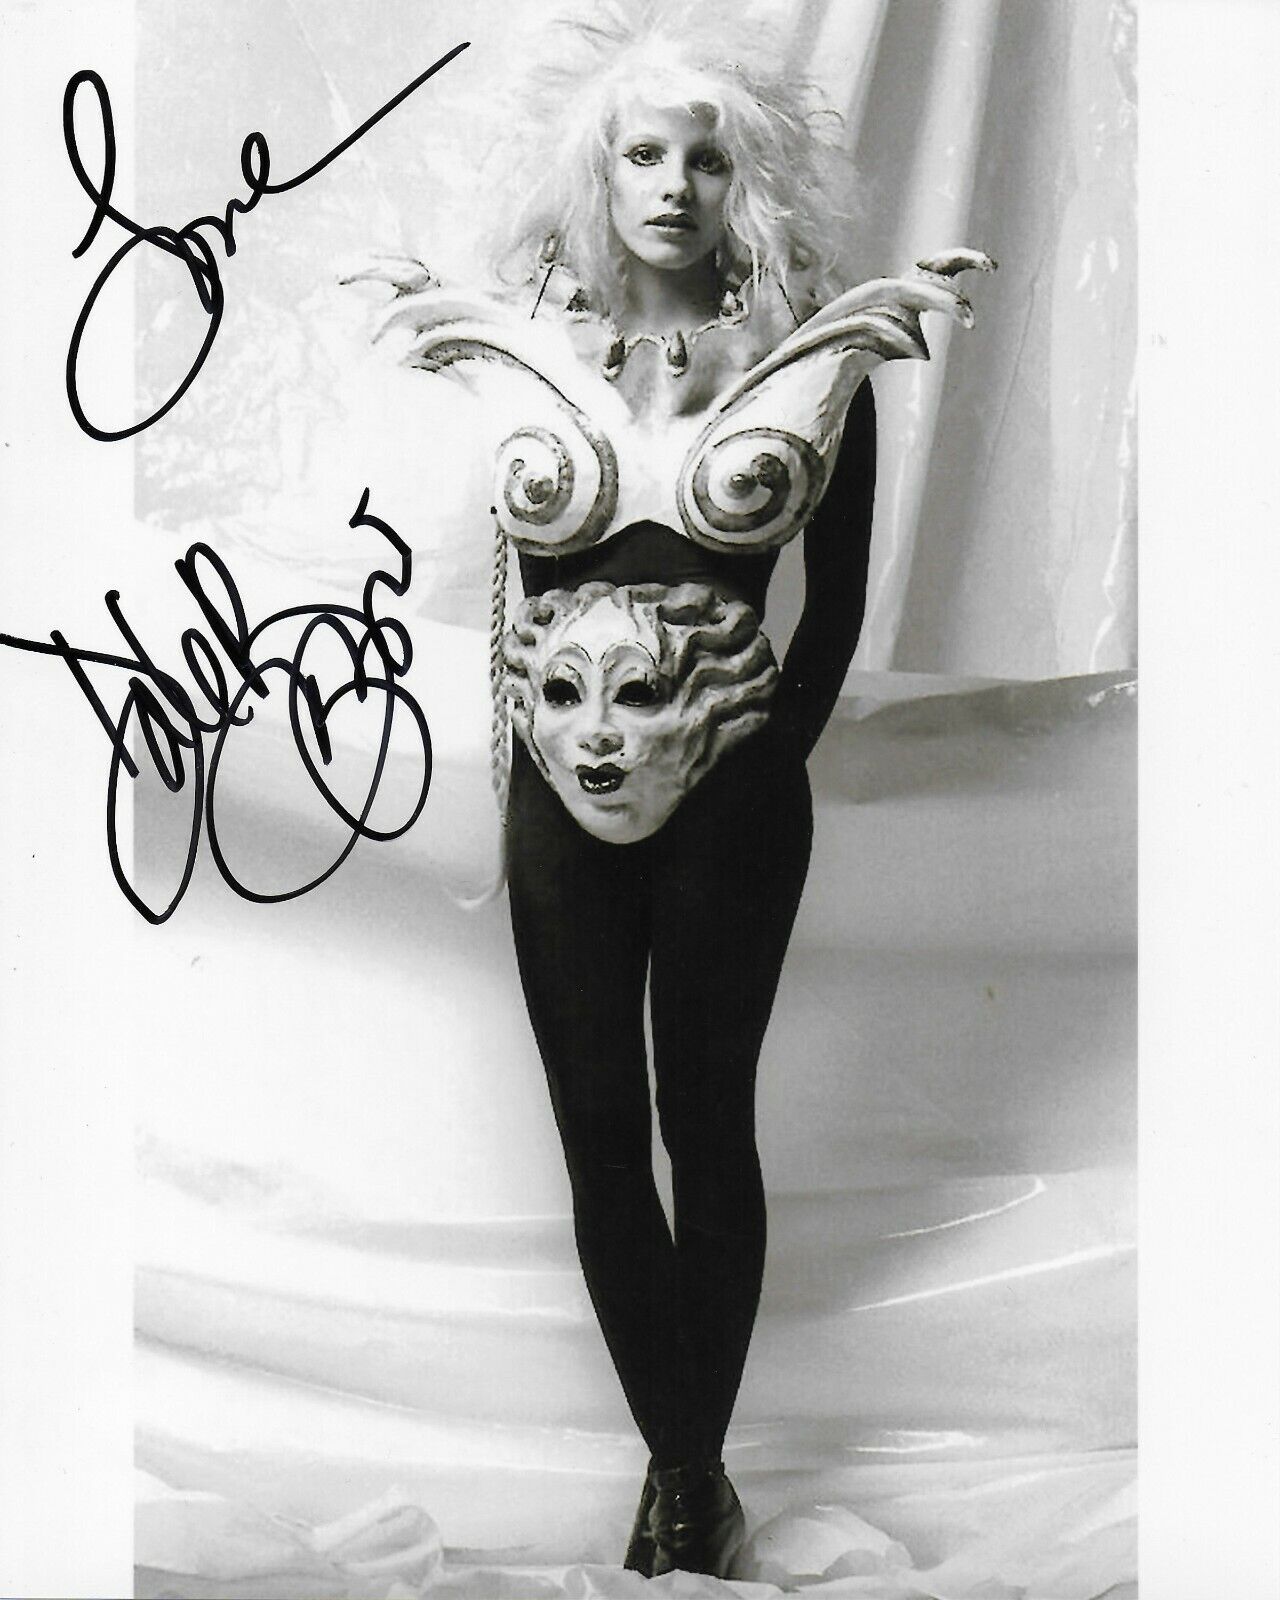 Dale Bozzio Missing Persons Original Signed 8x10 Photo Poster painting #30 At Hollywoodshow